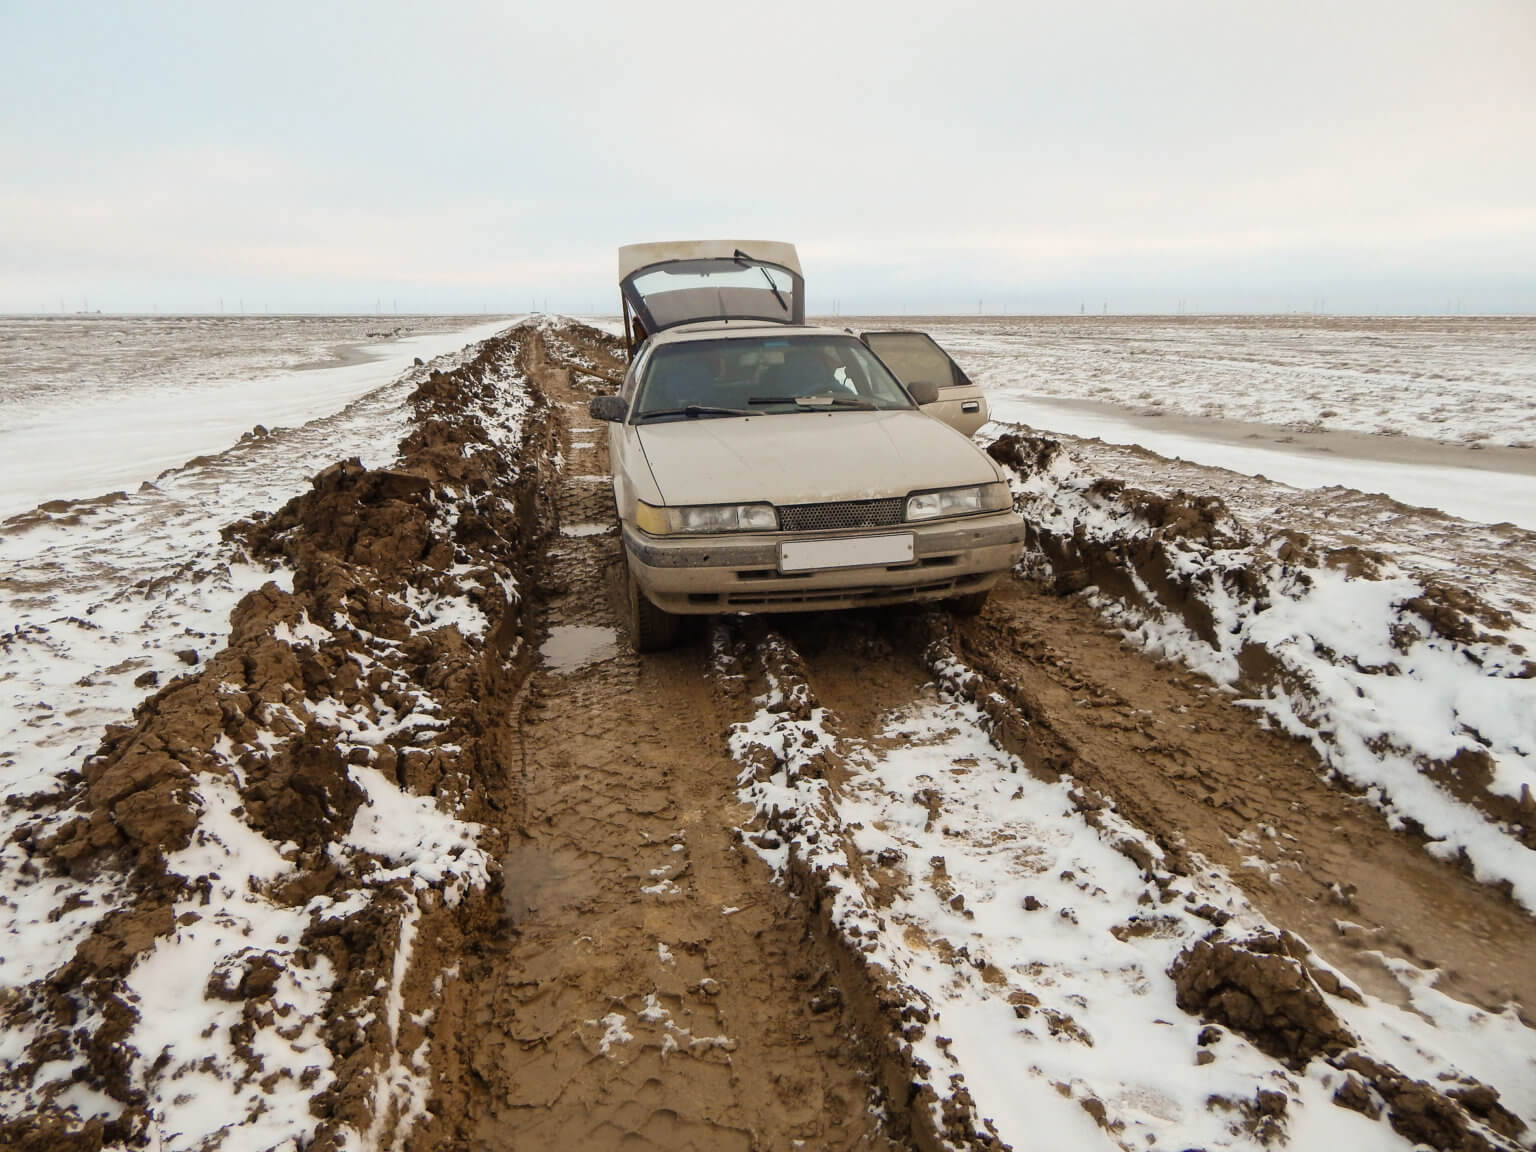 A car broken down on a very muddy rural road outside of Atyrau, in winter.